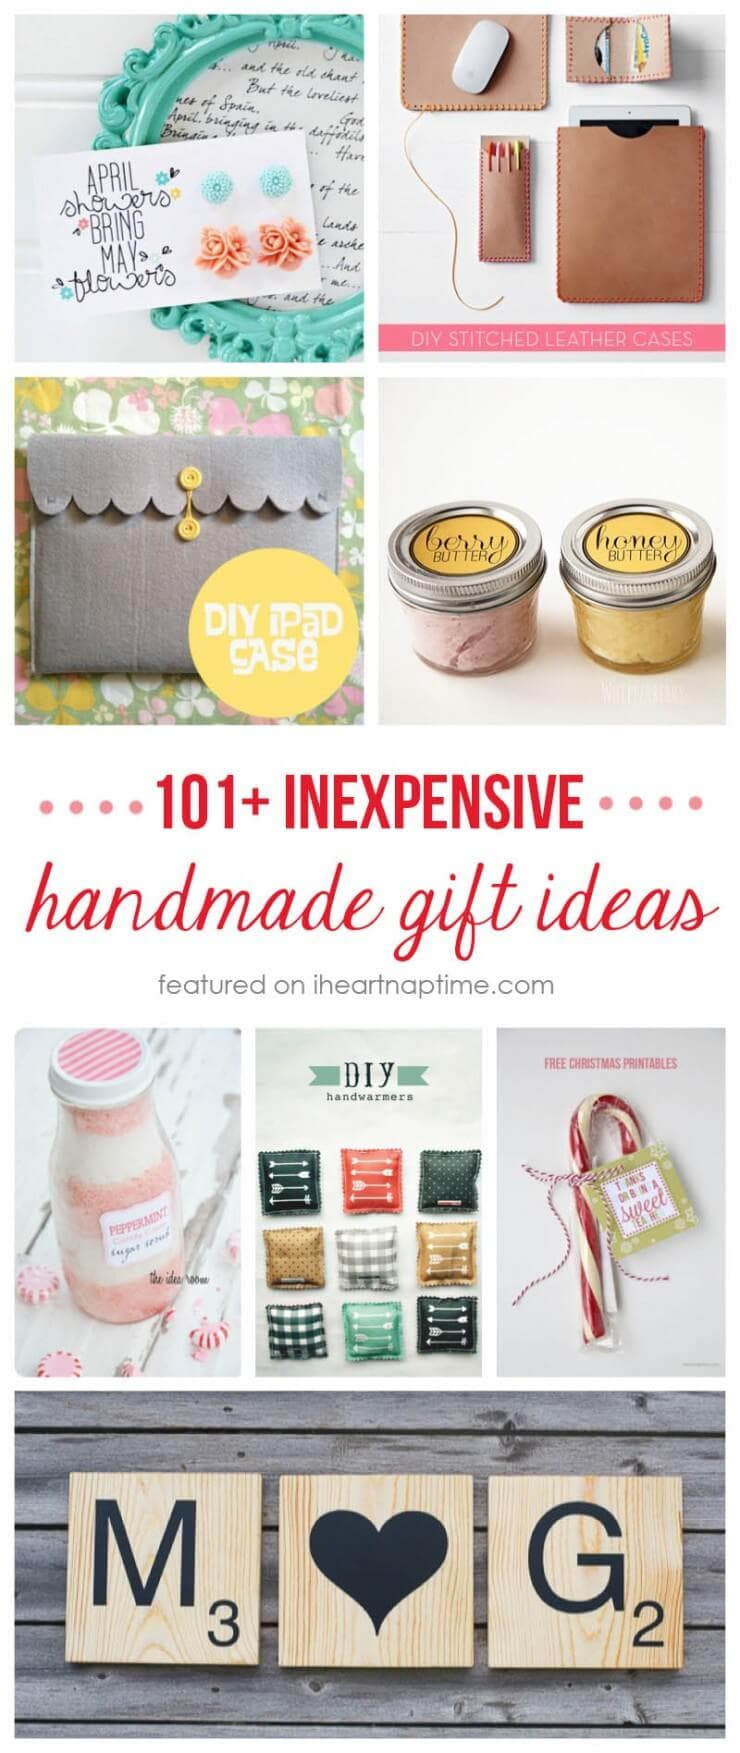 Inexpensive DIY Christmas Gifts
 50 homemade t ideas to make for under $5 I Heart Nap Time